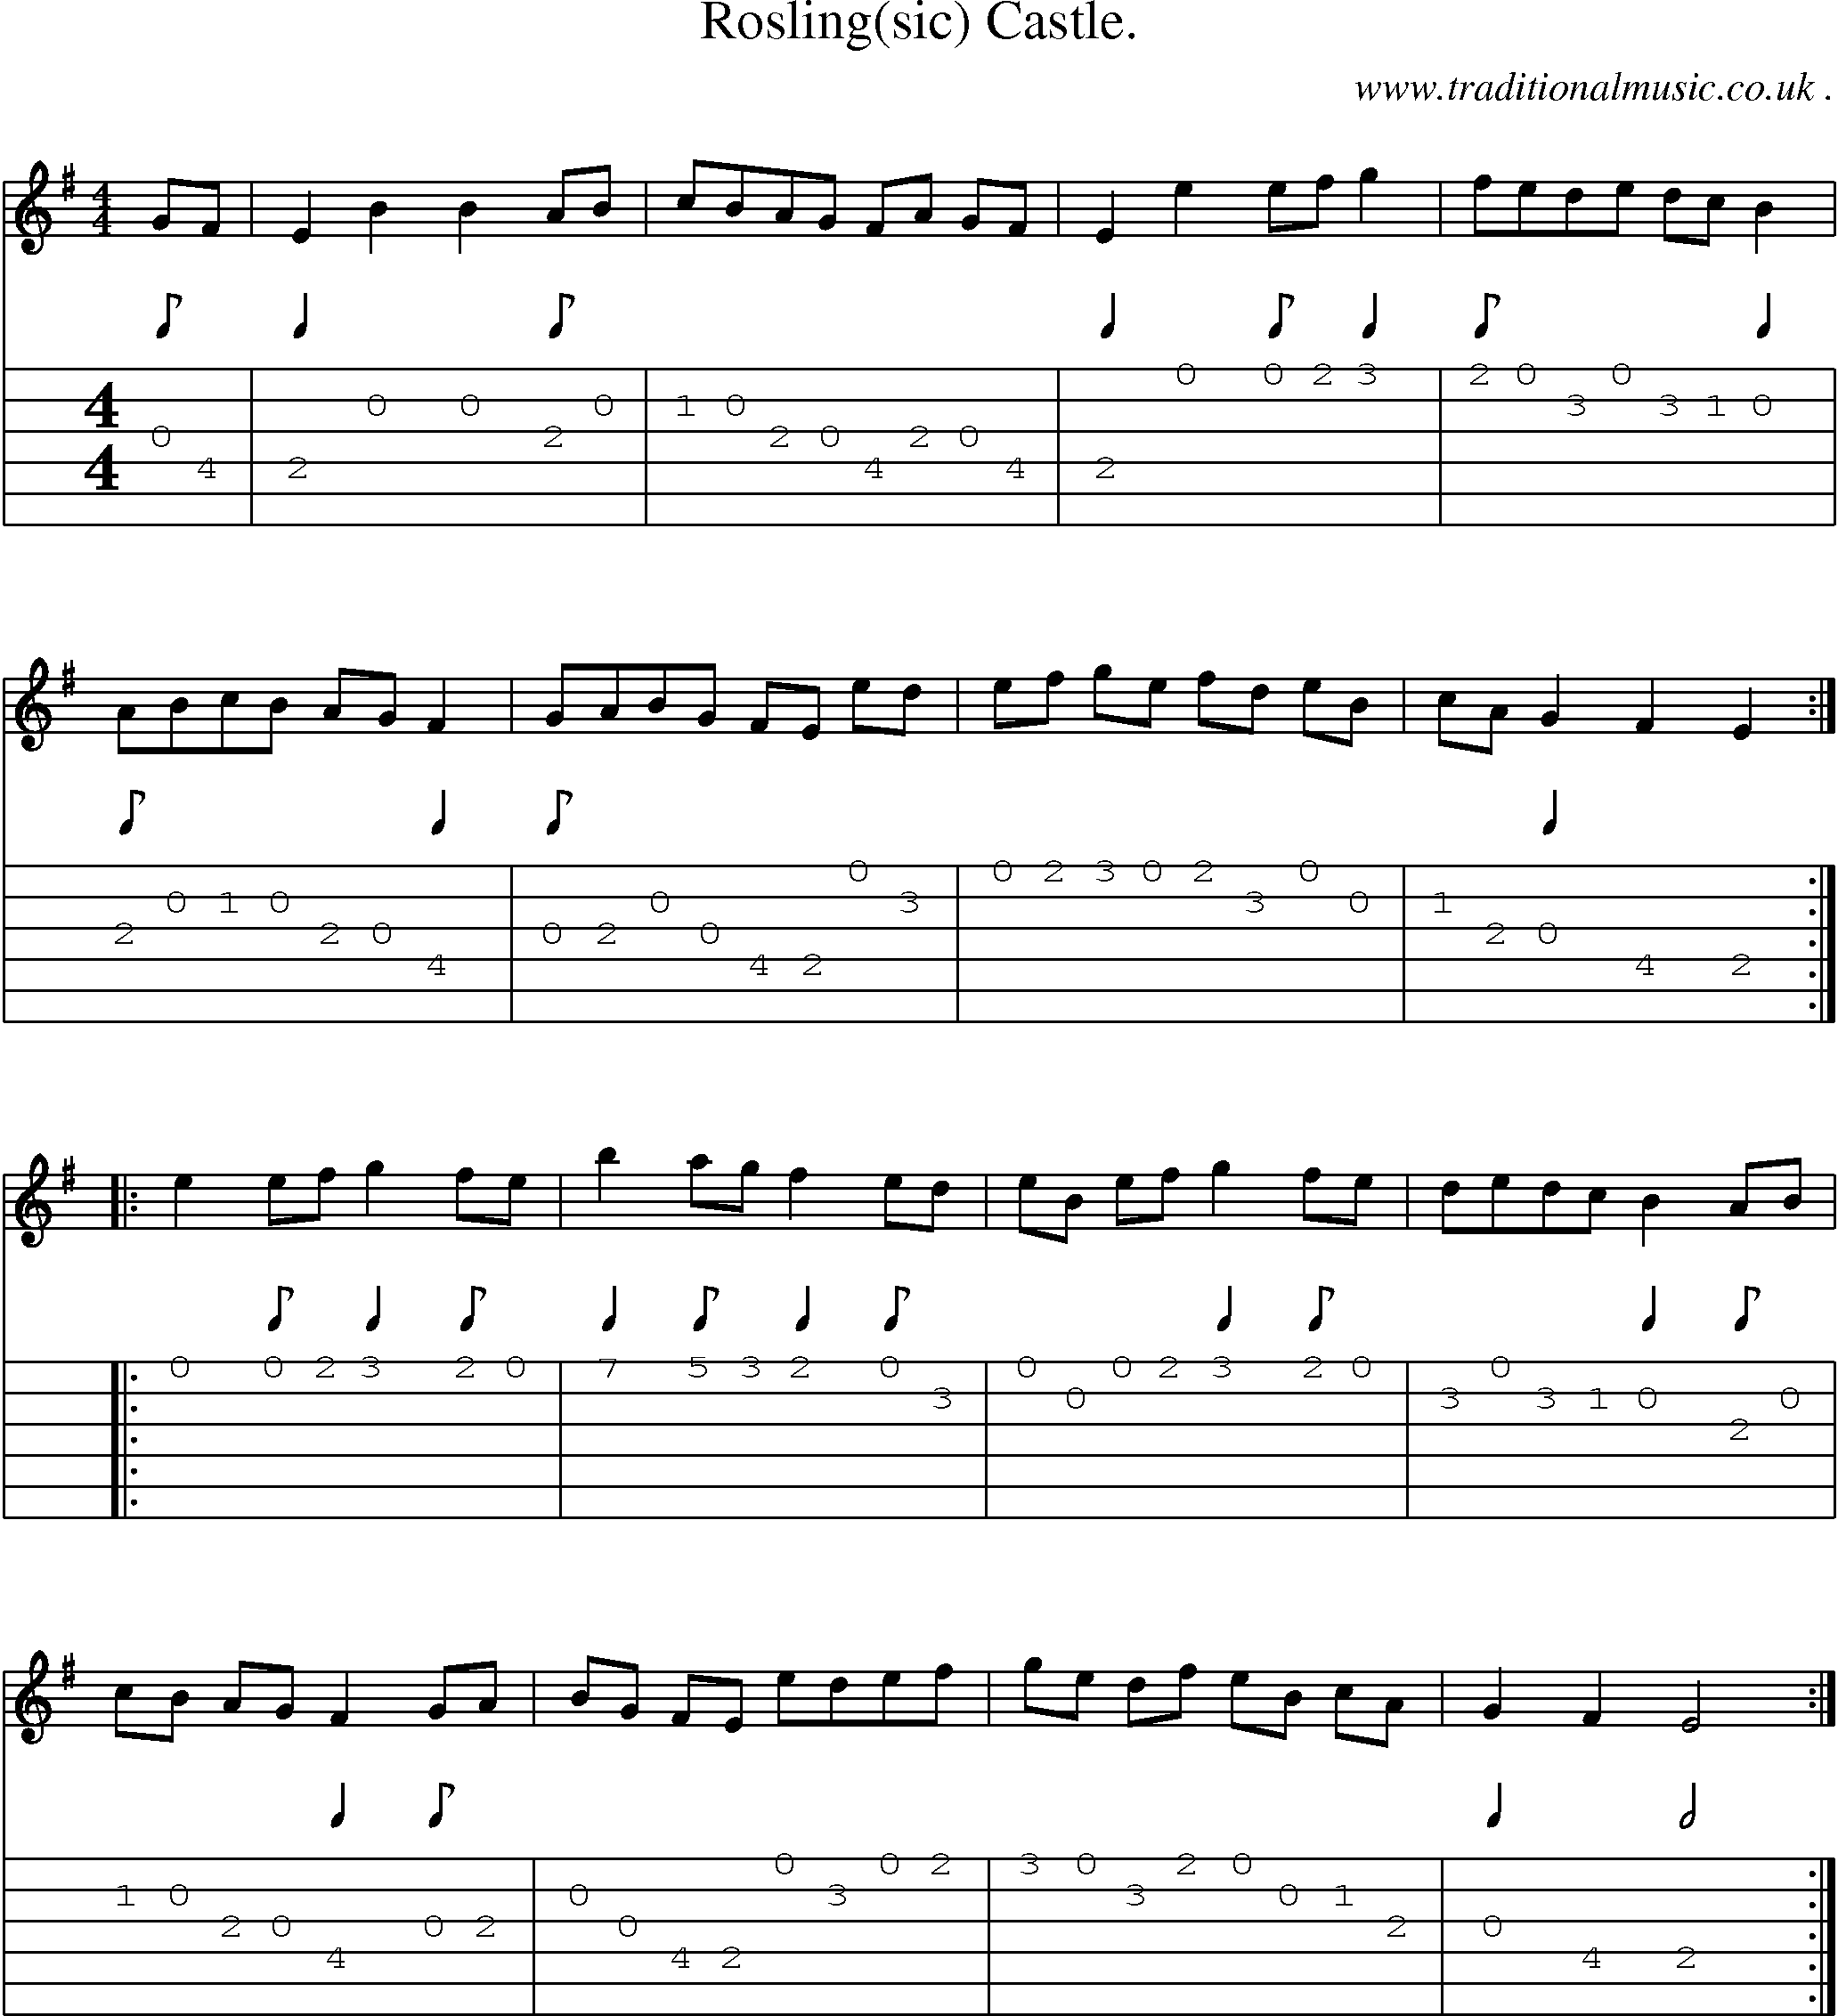 Sheet-Music and Guitar Tabs for Rosling(sic) Castle